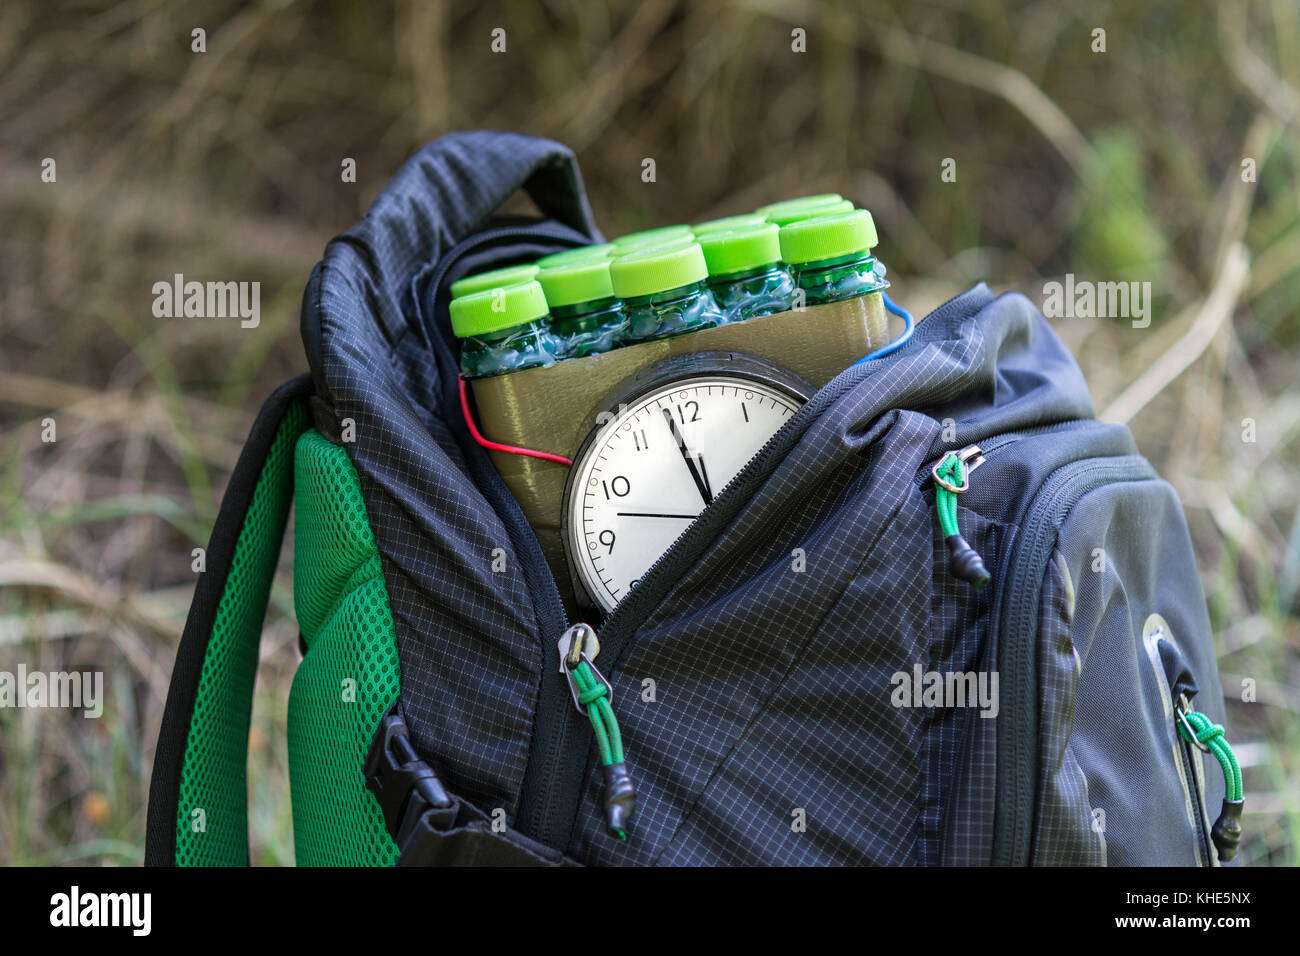 Close-up of timed bomb in the backpack. Dangerous explosive device in pack on grassy background. Stock Photo